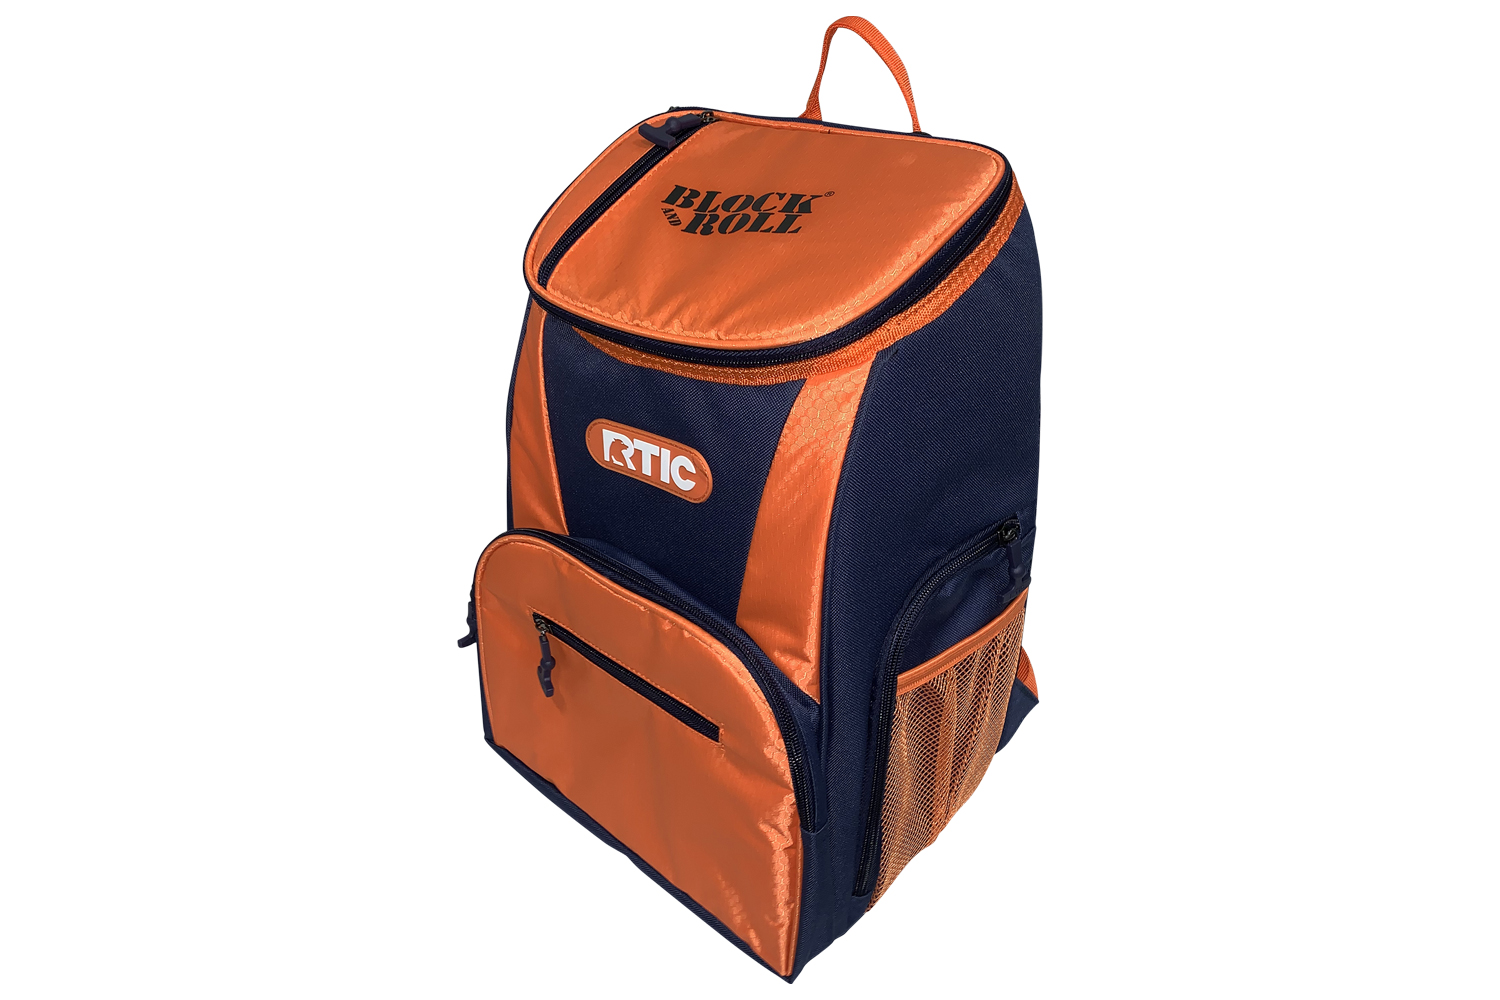 rtic backpack cooler